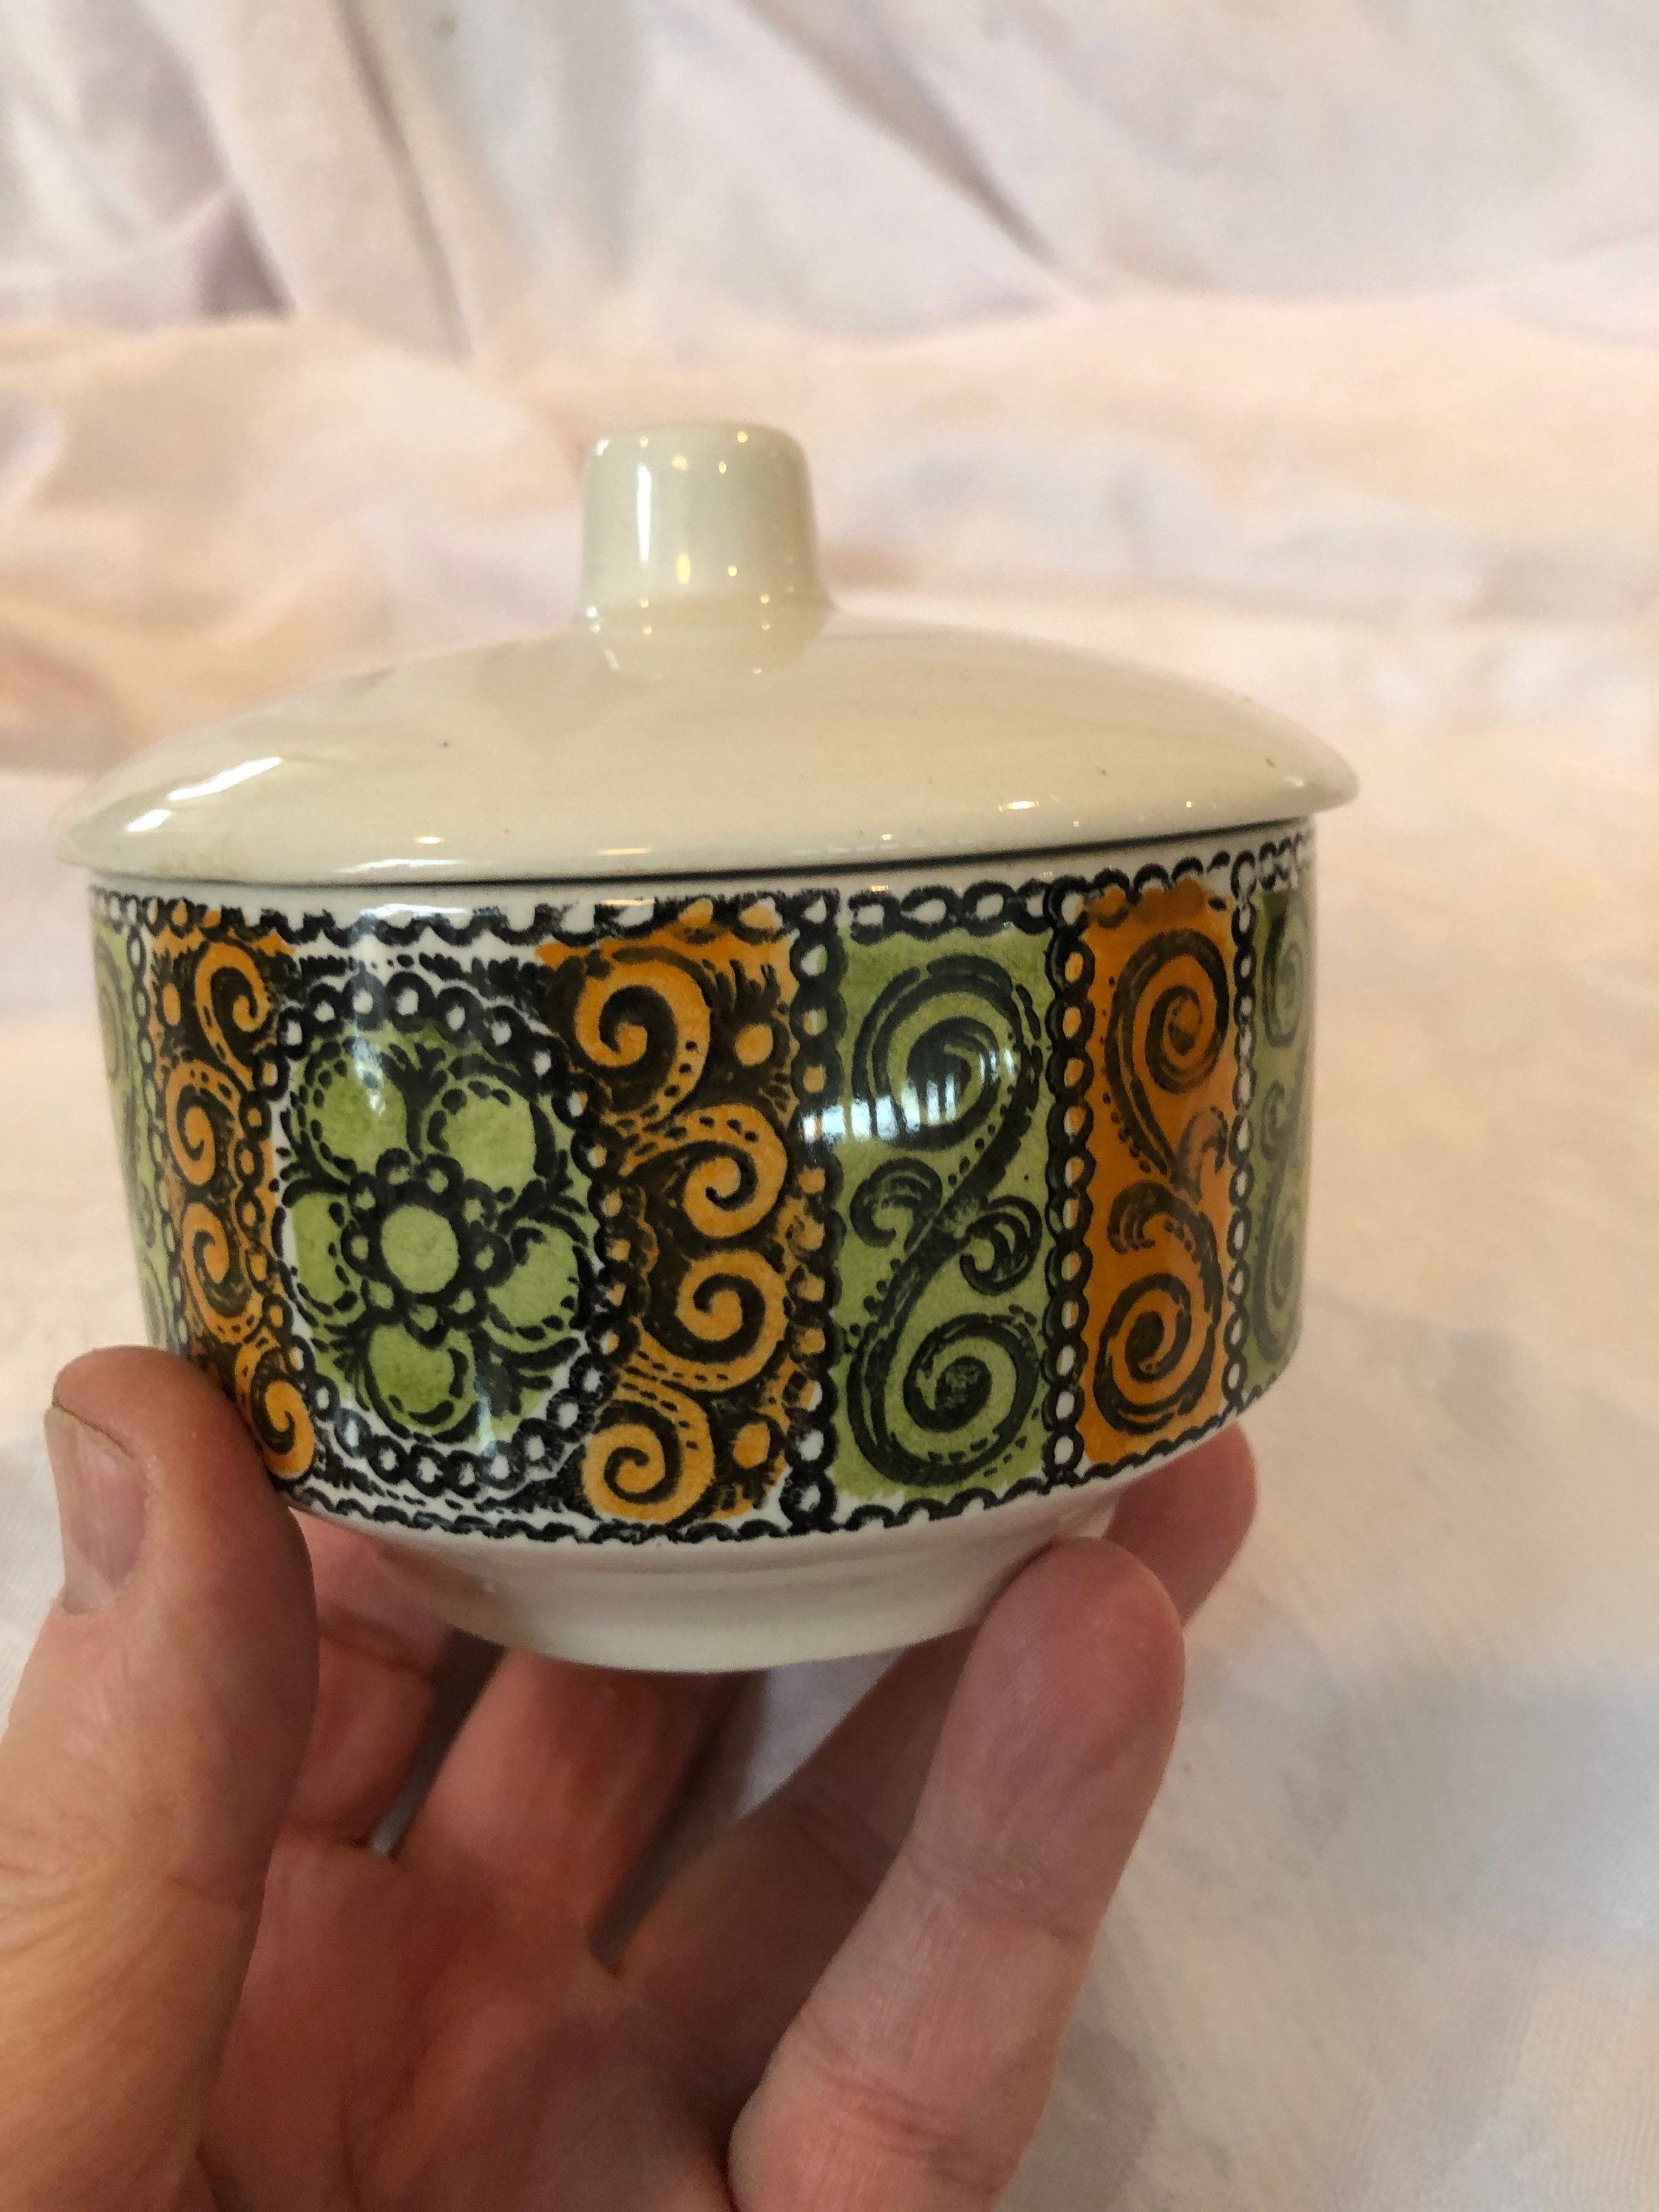 C 1960 Broadhurst pottery England. Vintage Kathie Winkle Autumn Glen  pattern covered sugar bowl preowned in good condition